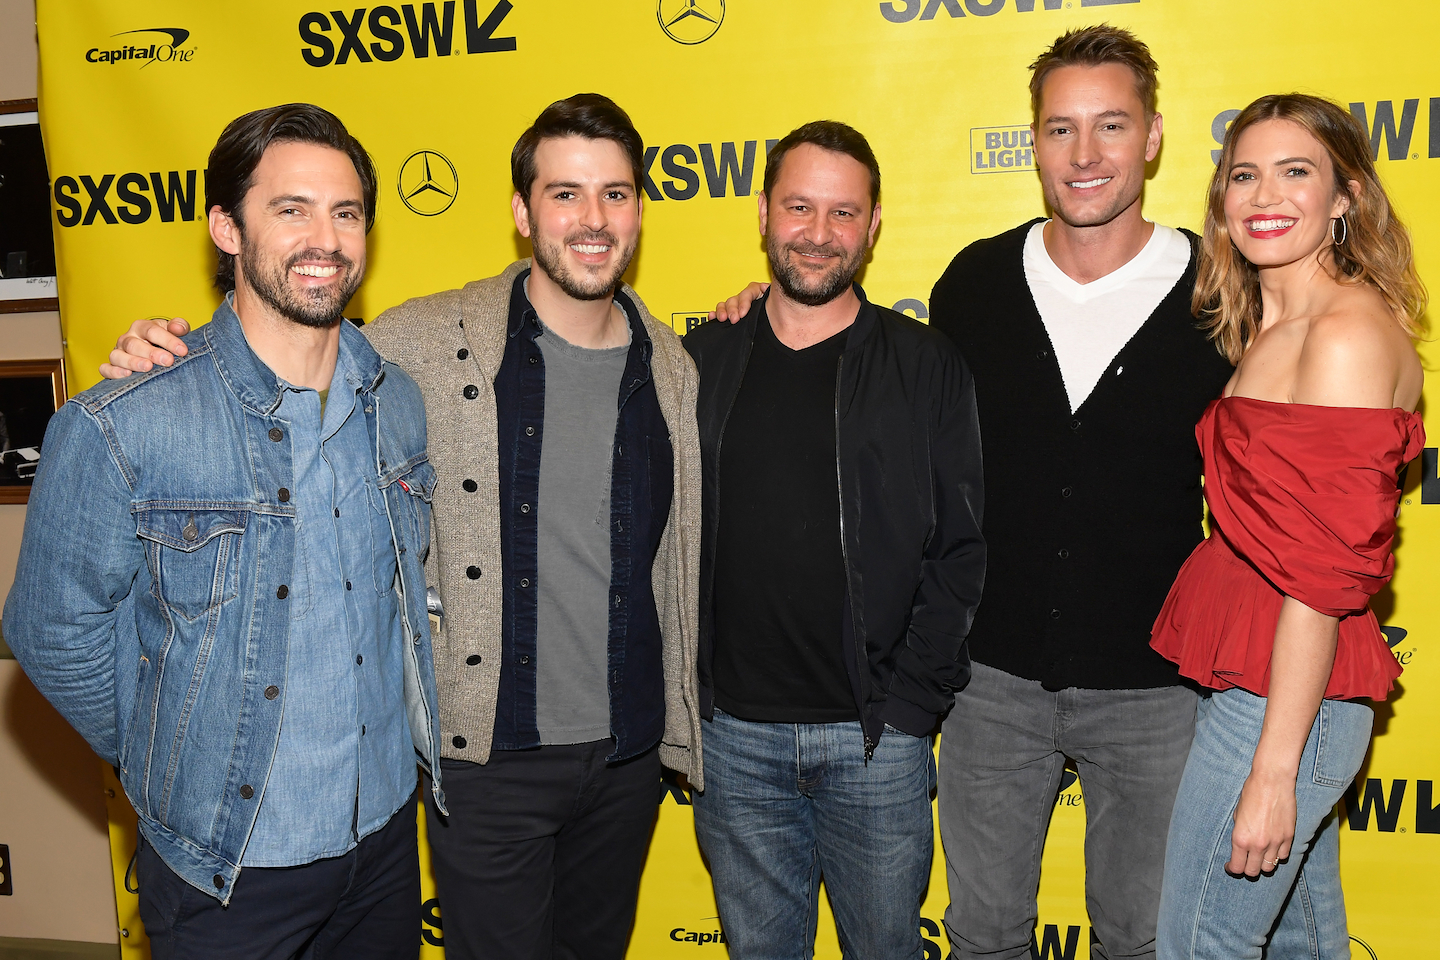 (L-R) Milo Ventimiglia, Issac Aptake, Dan Fogelman, Justin Hartley, and Mandy Moore attended the premiere of the This is Us Season 2 Finale at the Paramount Theatre. Photo by Matt Winkelmeyer/Getty Images for SXSW